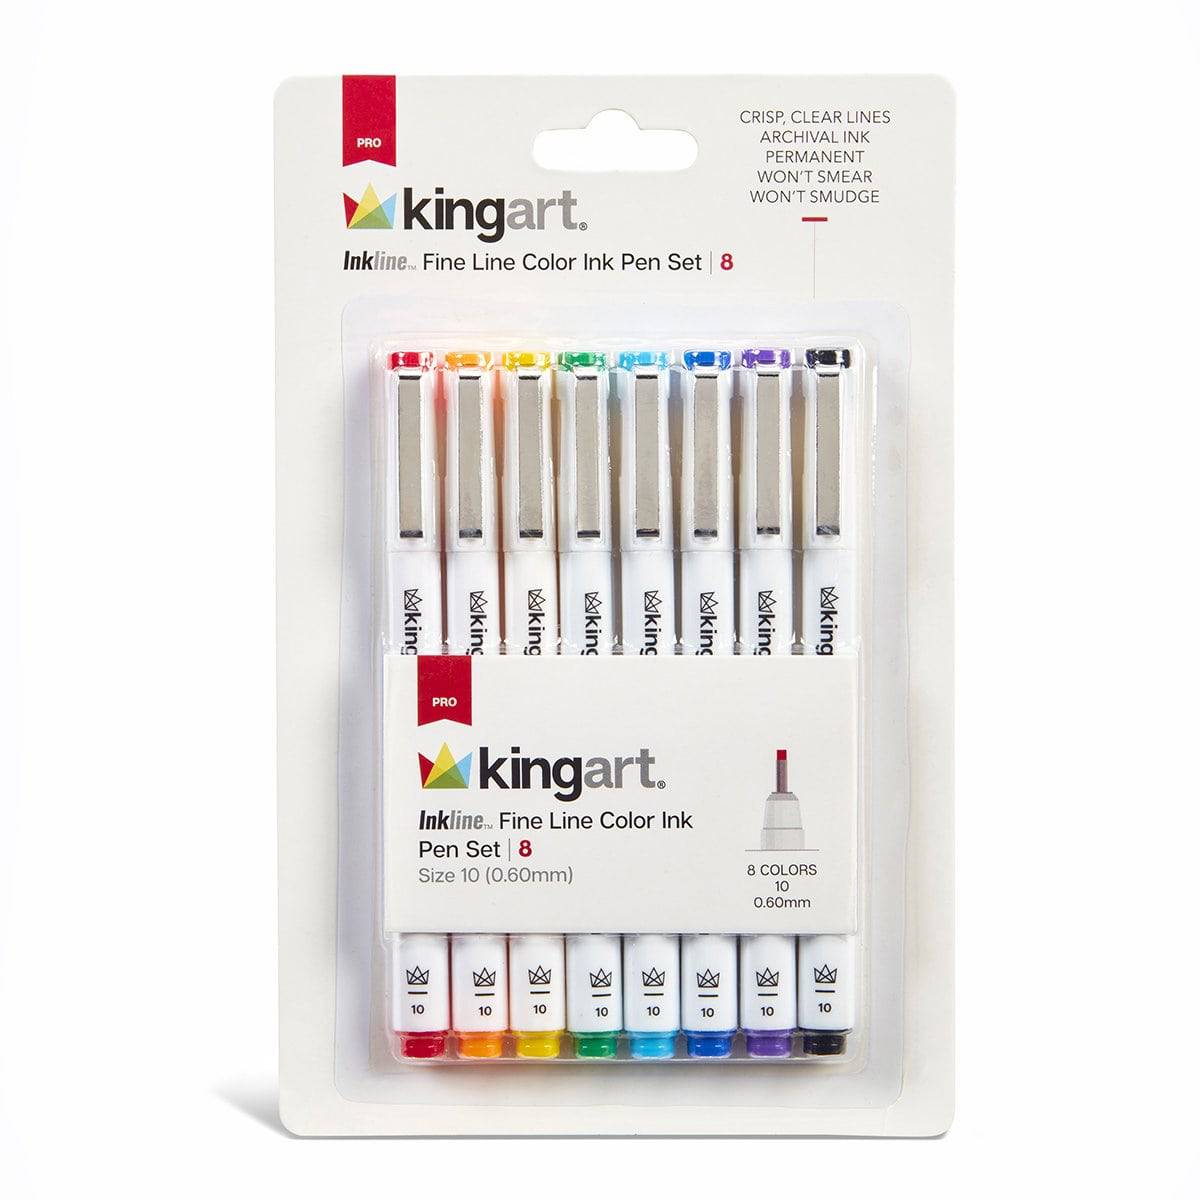 Artist Pens 14-Count, Assorted Tip Sizes